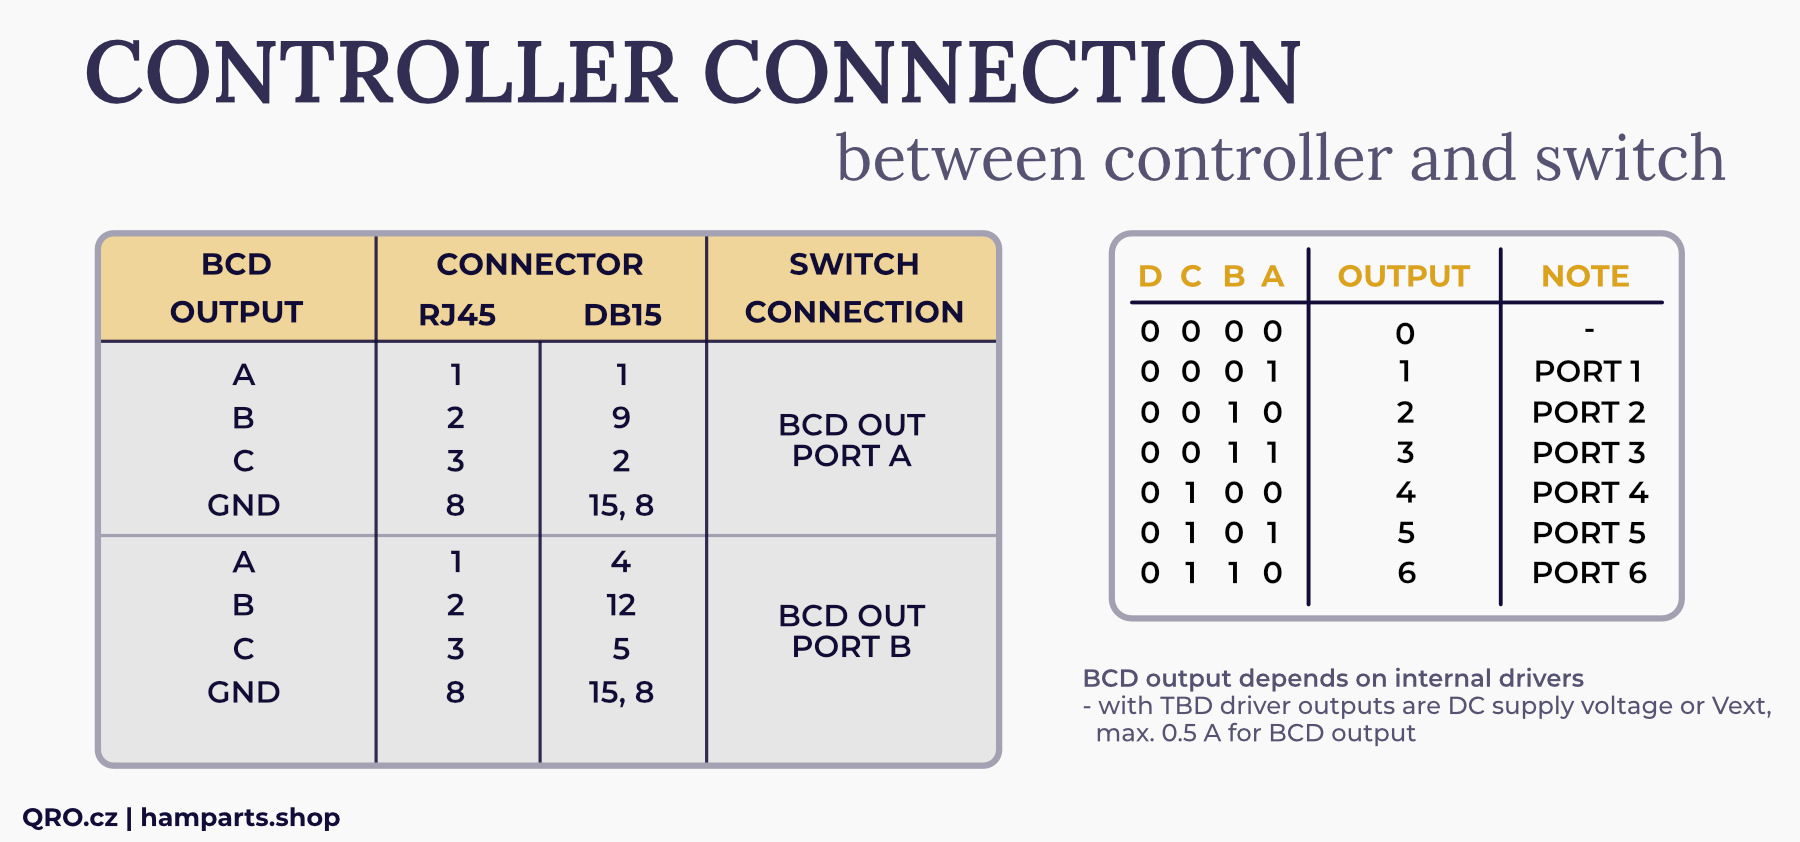 bcd outputs 6-2 easy controller  by qro.cz hamparts.shop